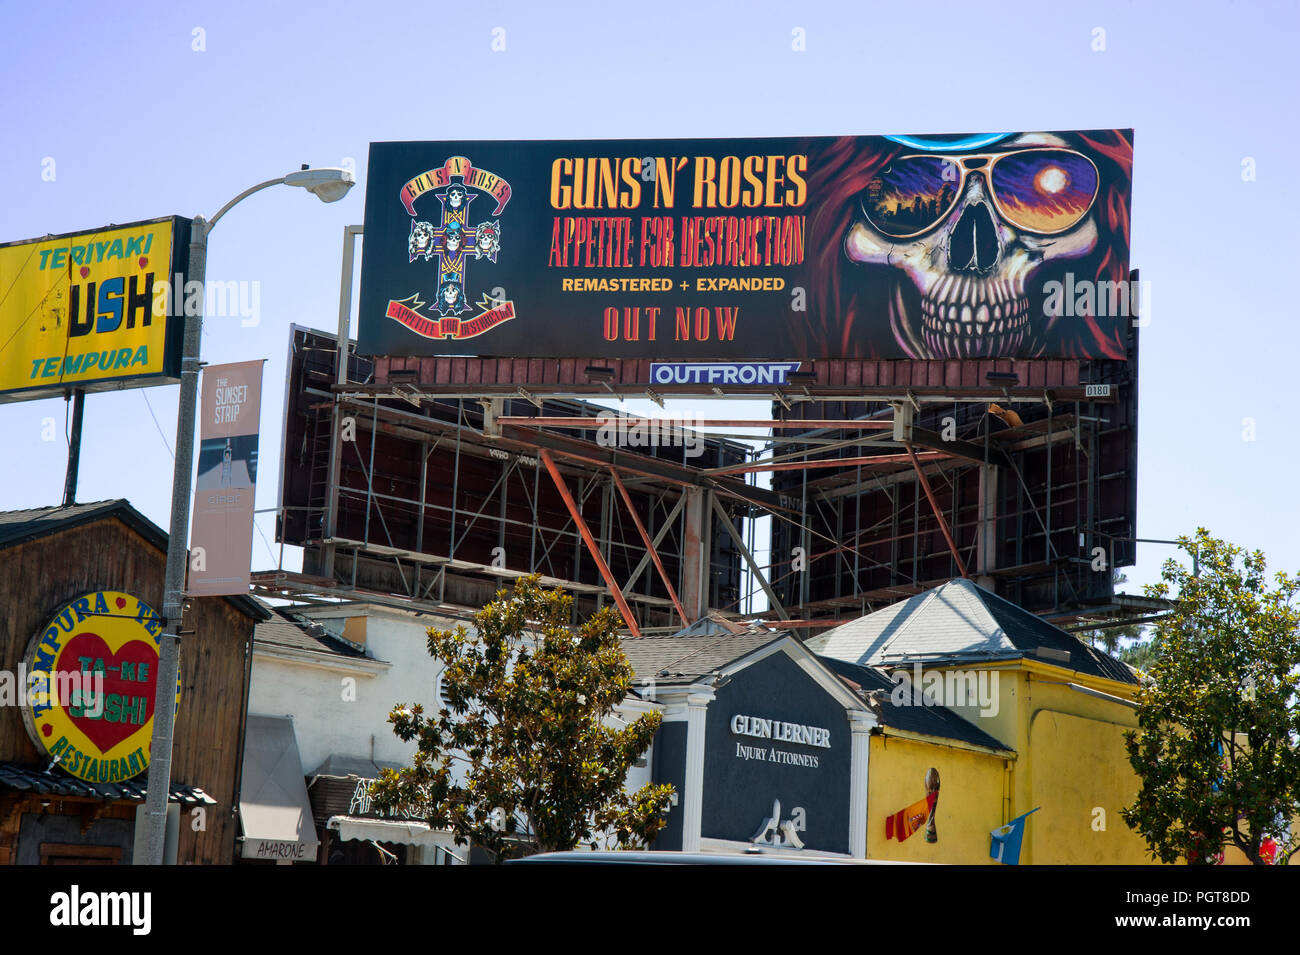 Billboard promoting rock band Guns N roses on the Sunset Strip in Los Angeles, CA Stock Photo